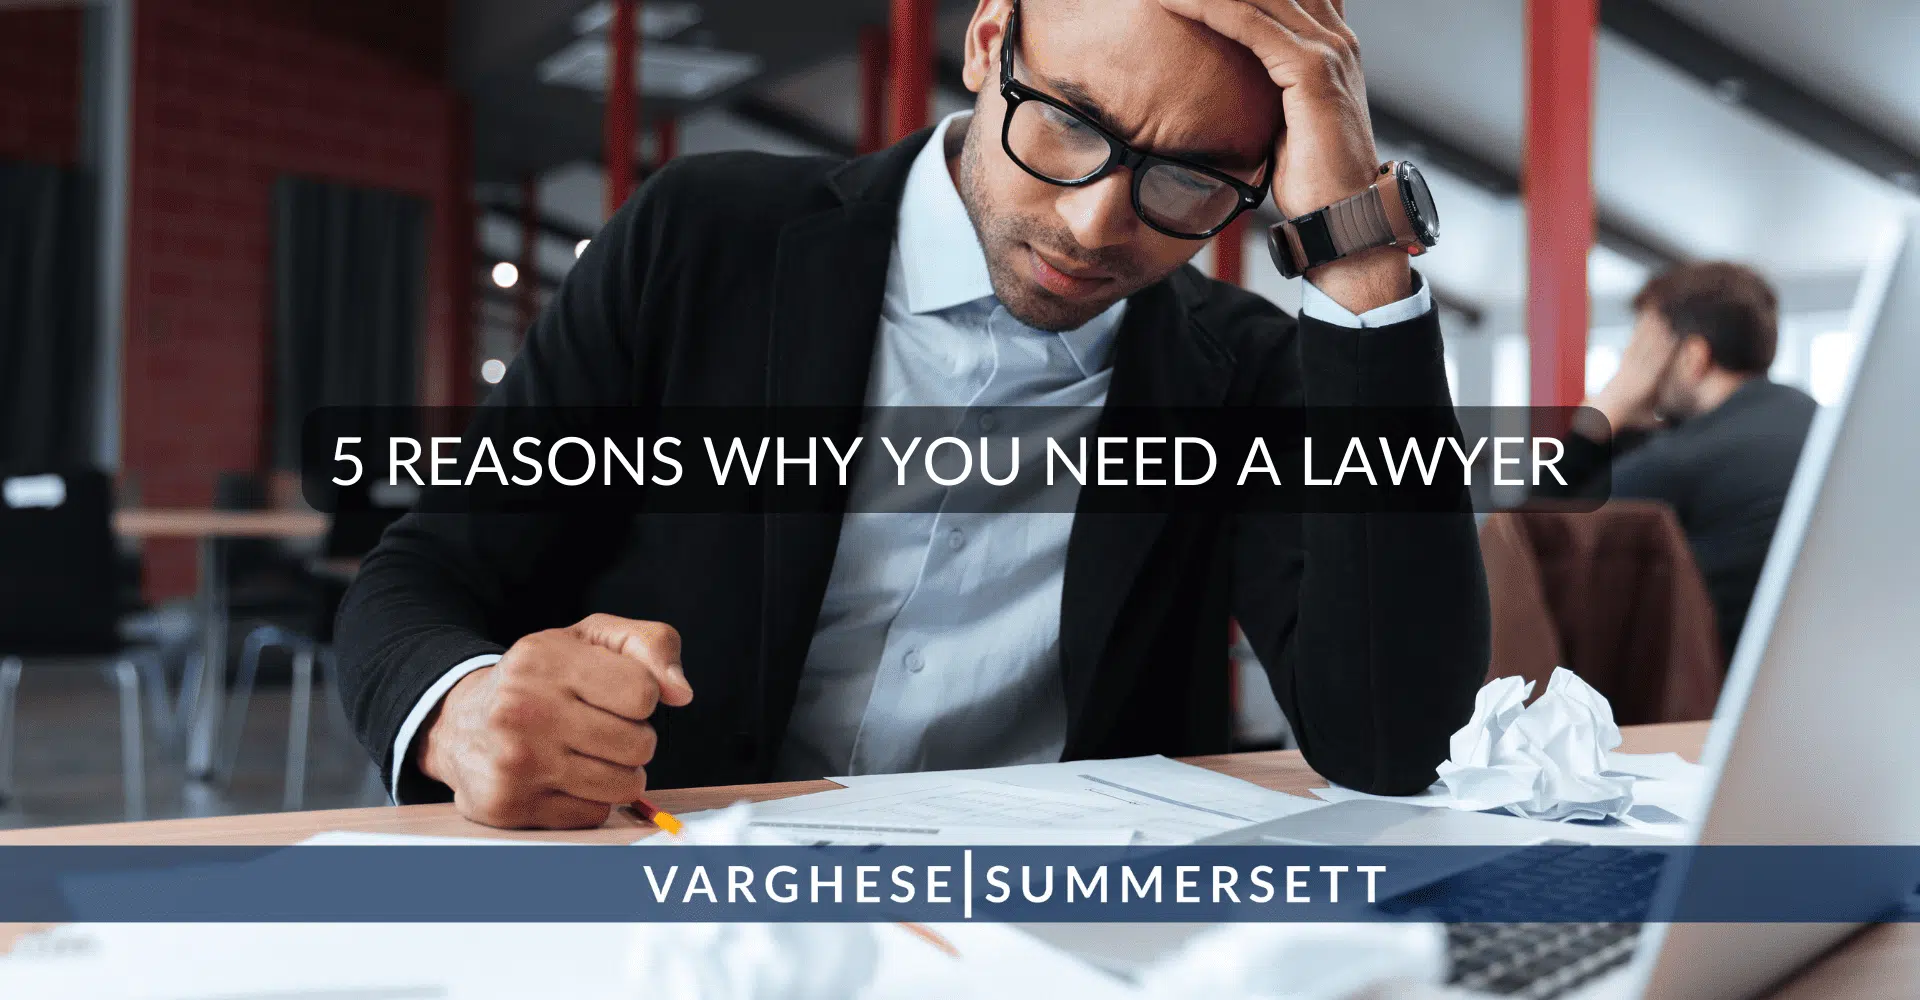 5 REASONS WHY YOU NEED FAMILY LAW ATTORNEY